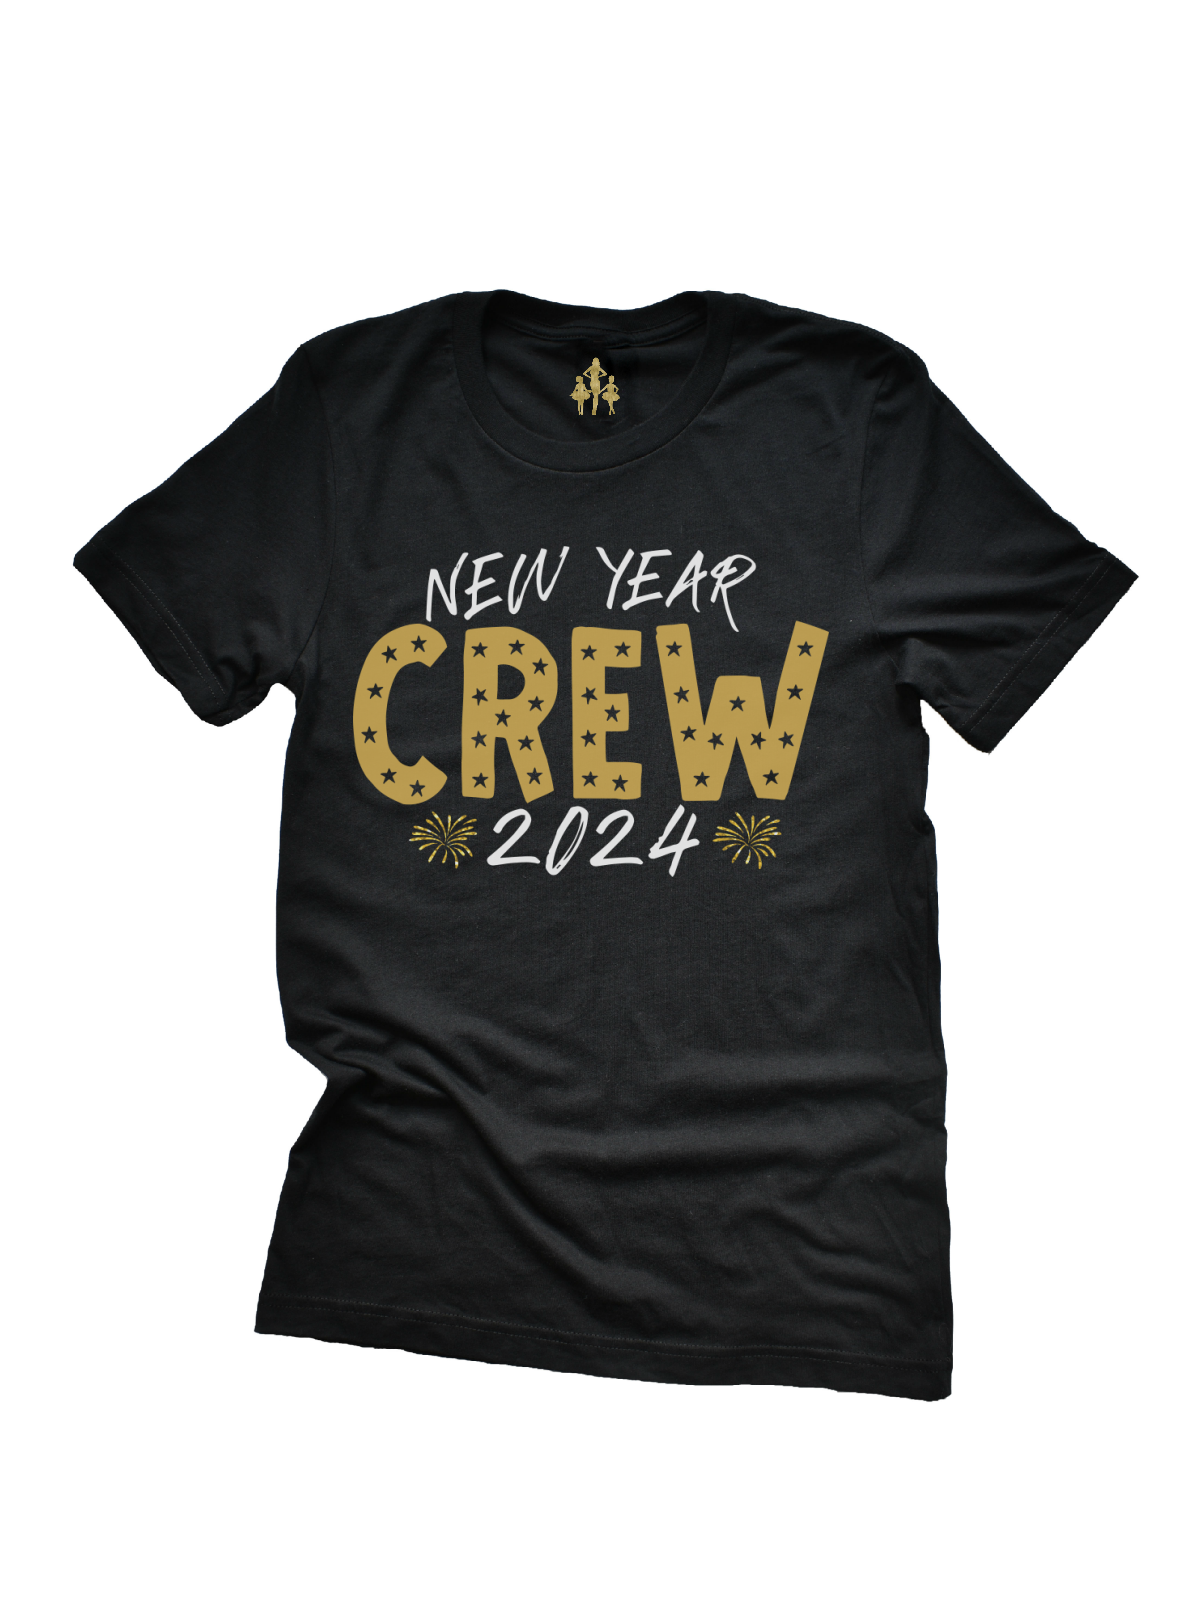 New Year Crew 2024 Adult Shirt in Black